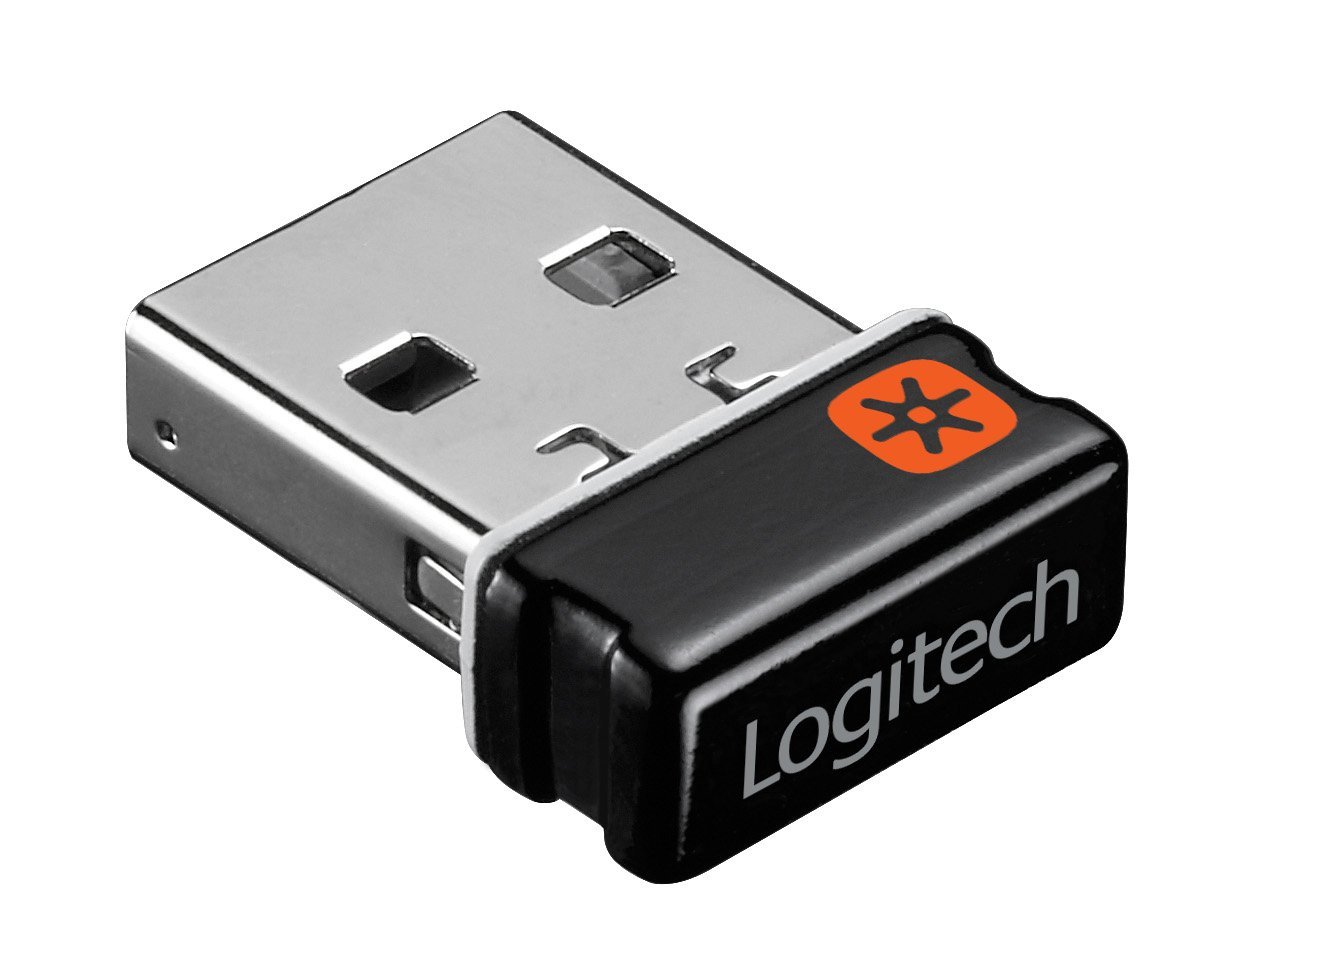 NEW Logitech Unifying USB Receiver, Dongle (993-000439)